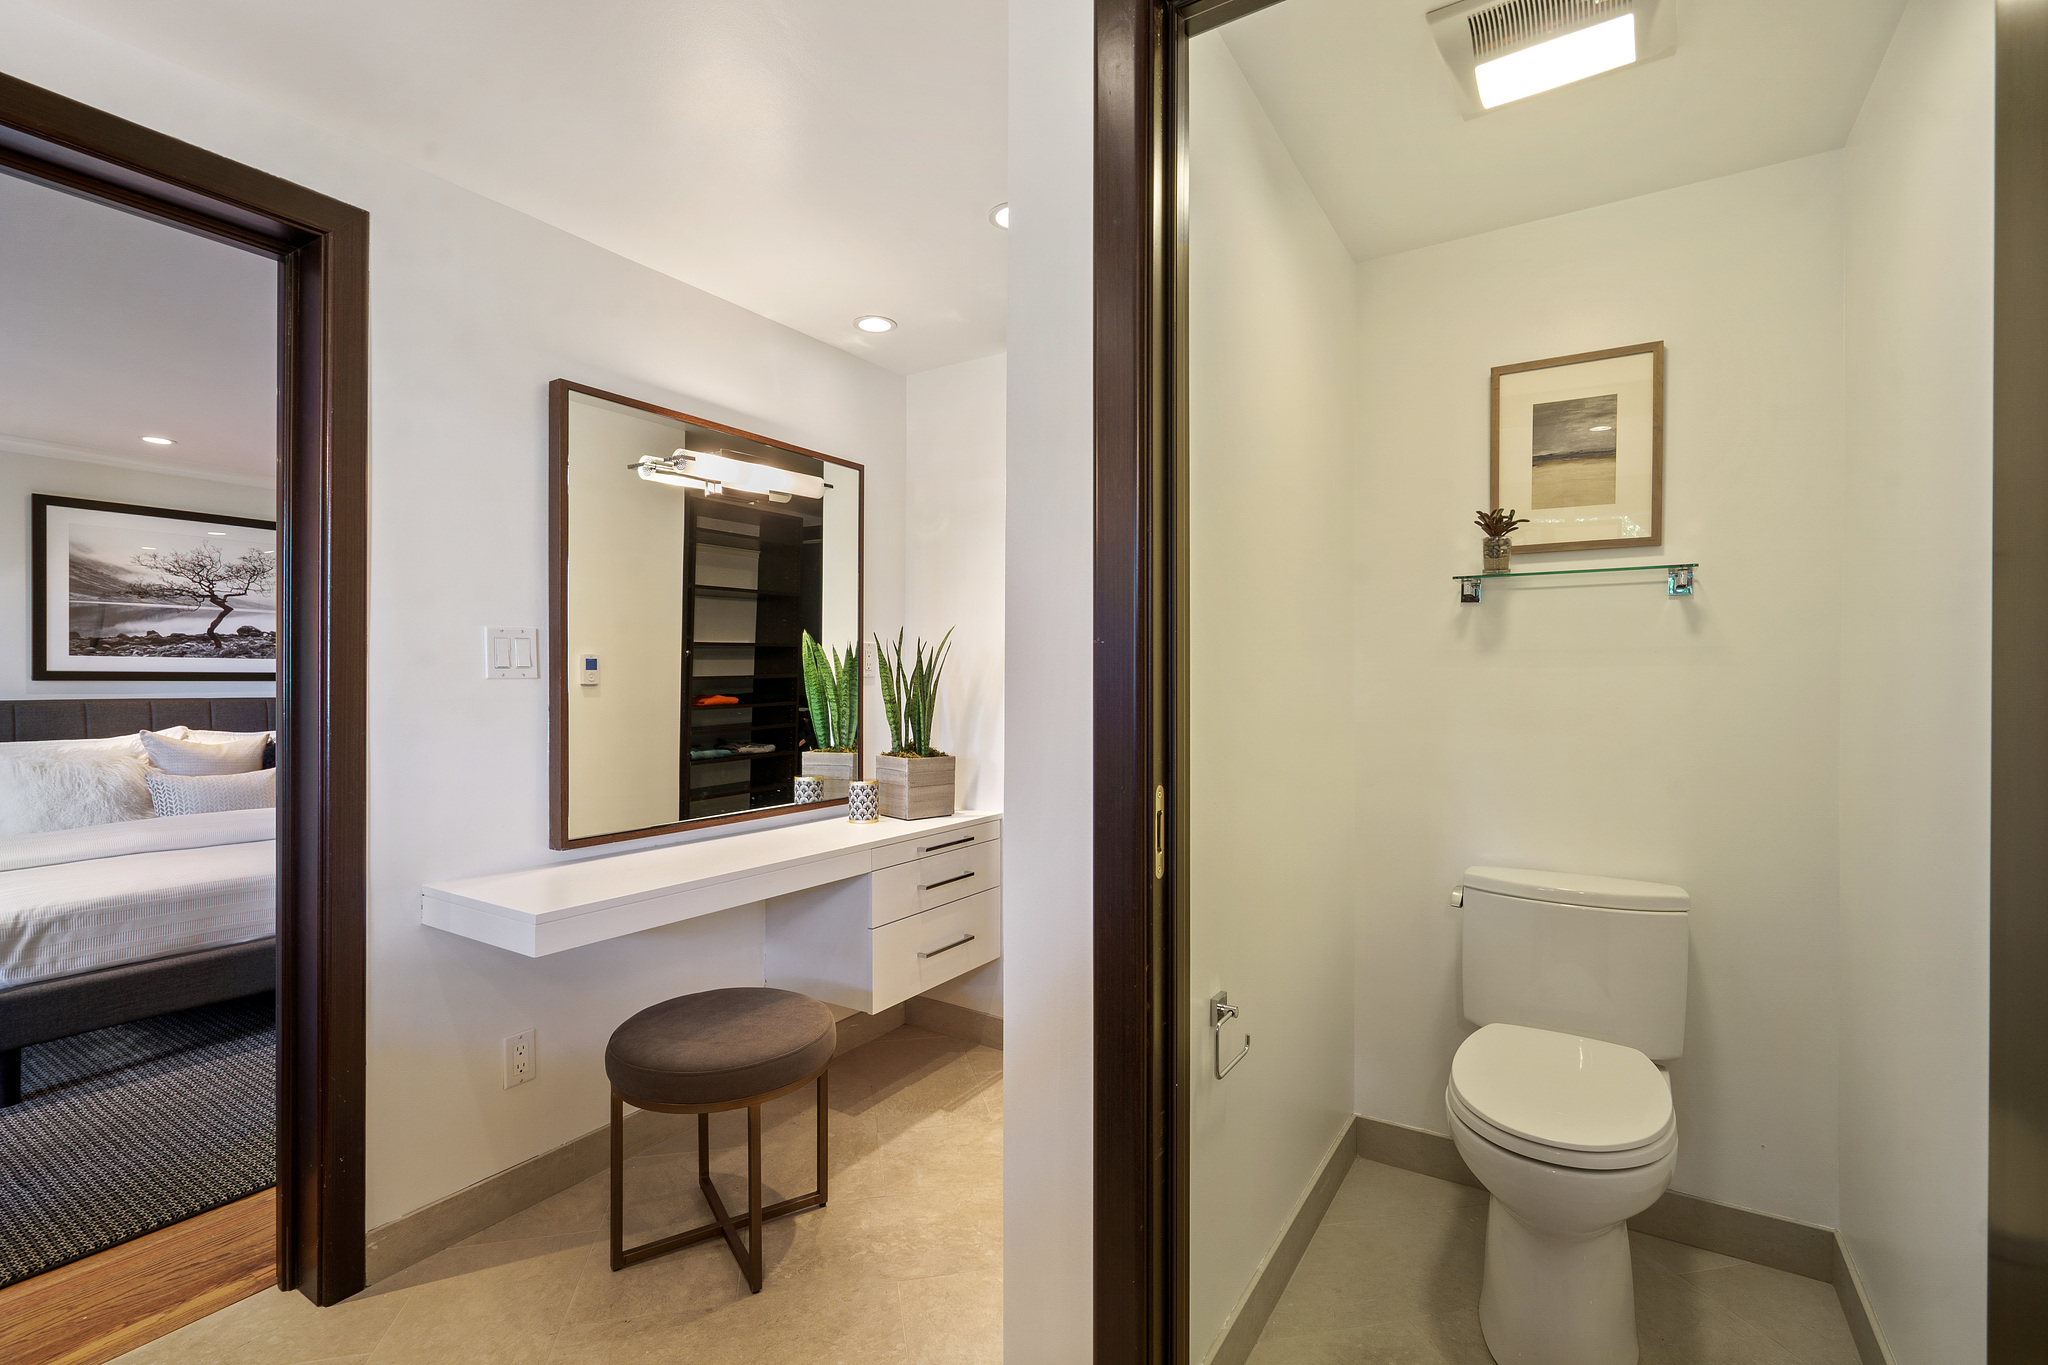 Property Photo: Bathroom with adjacent vanity and grooming area